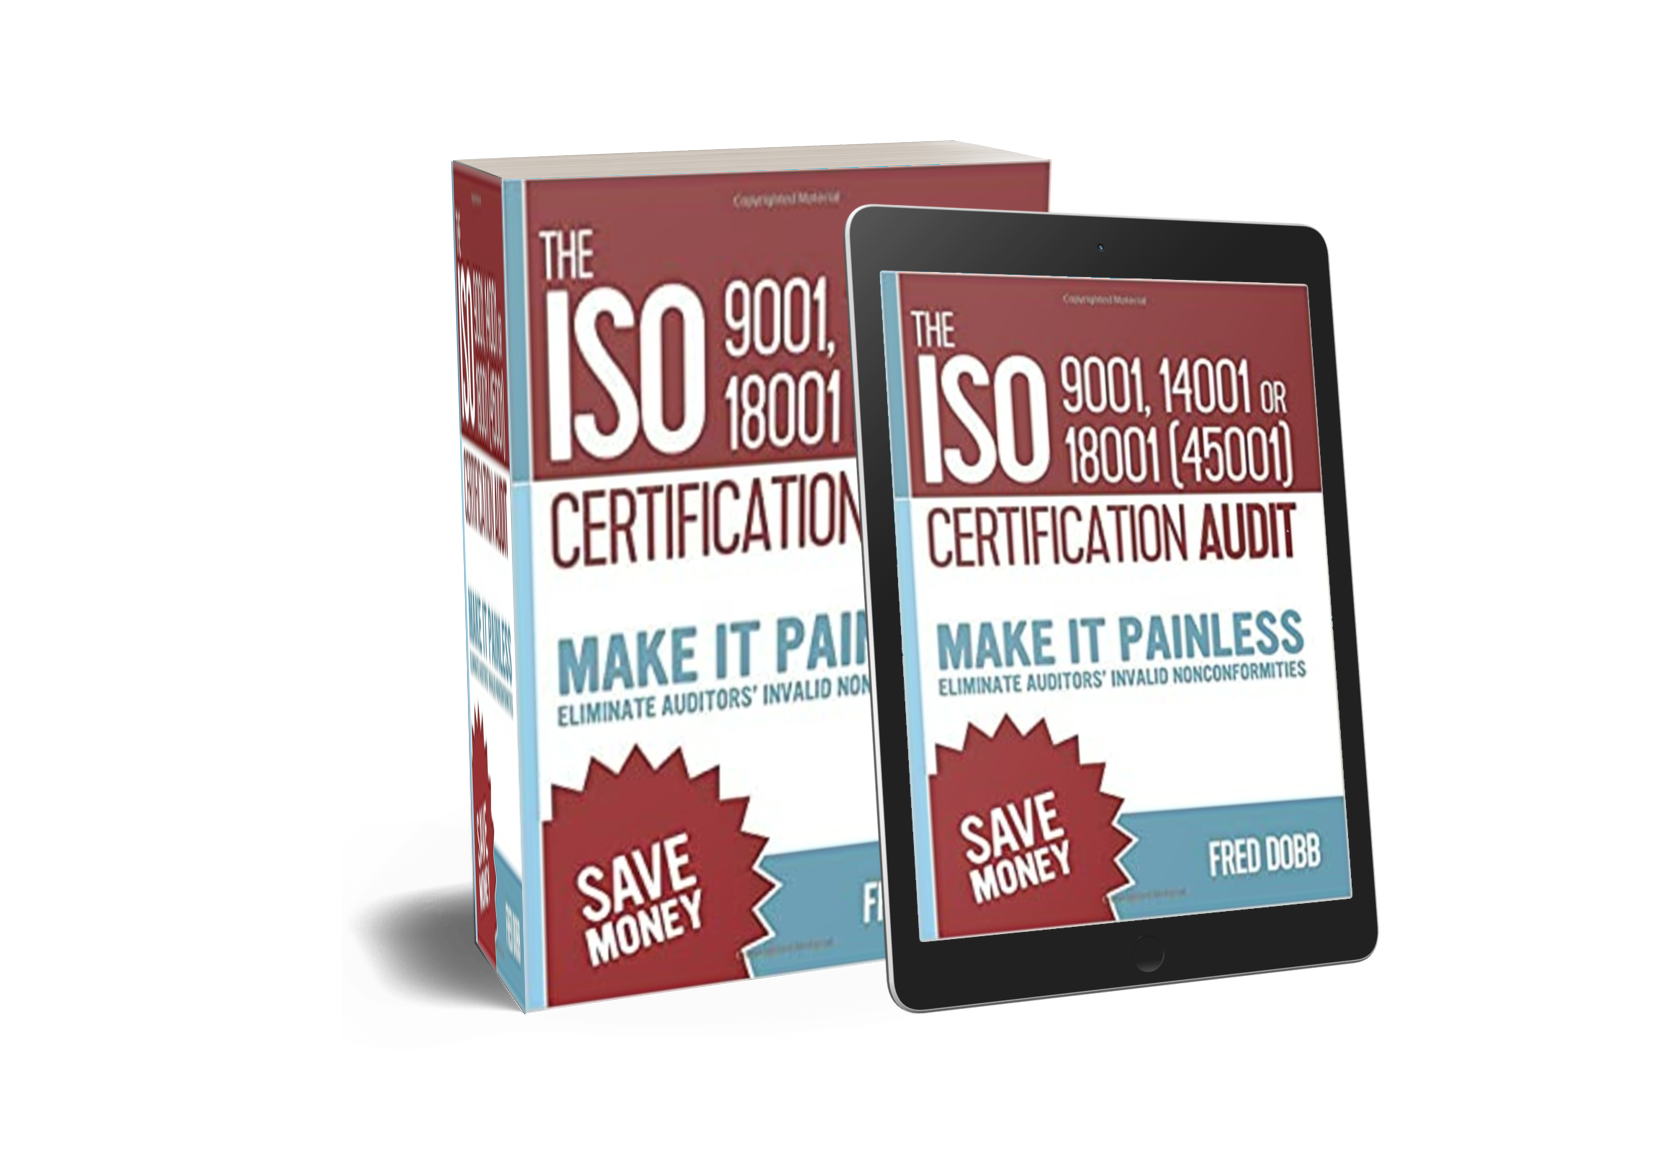 The ISO 9001, 14001 or 18001(45001) certification audit: Make it painless Eliminate auditors’ invalid nonconformities (ISO-Quality)